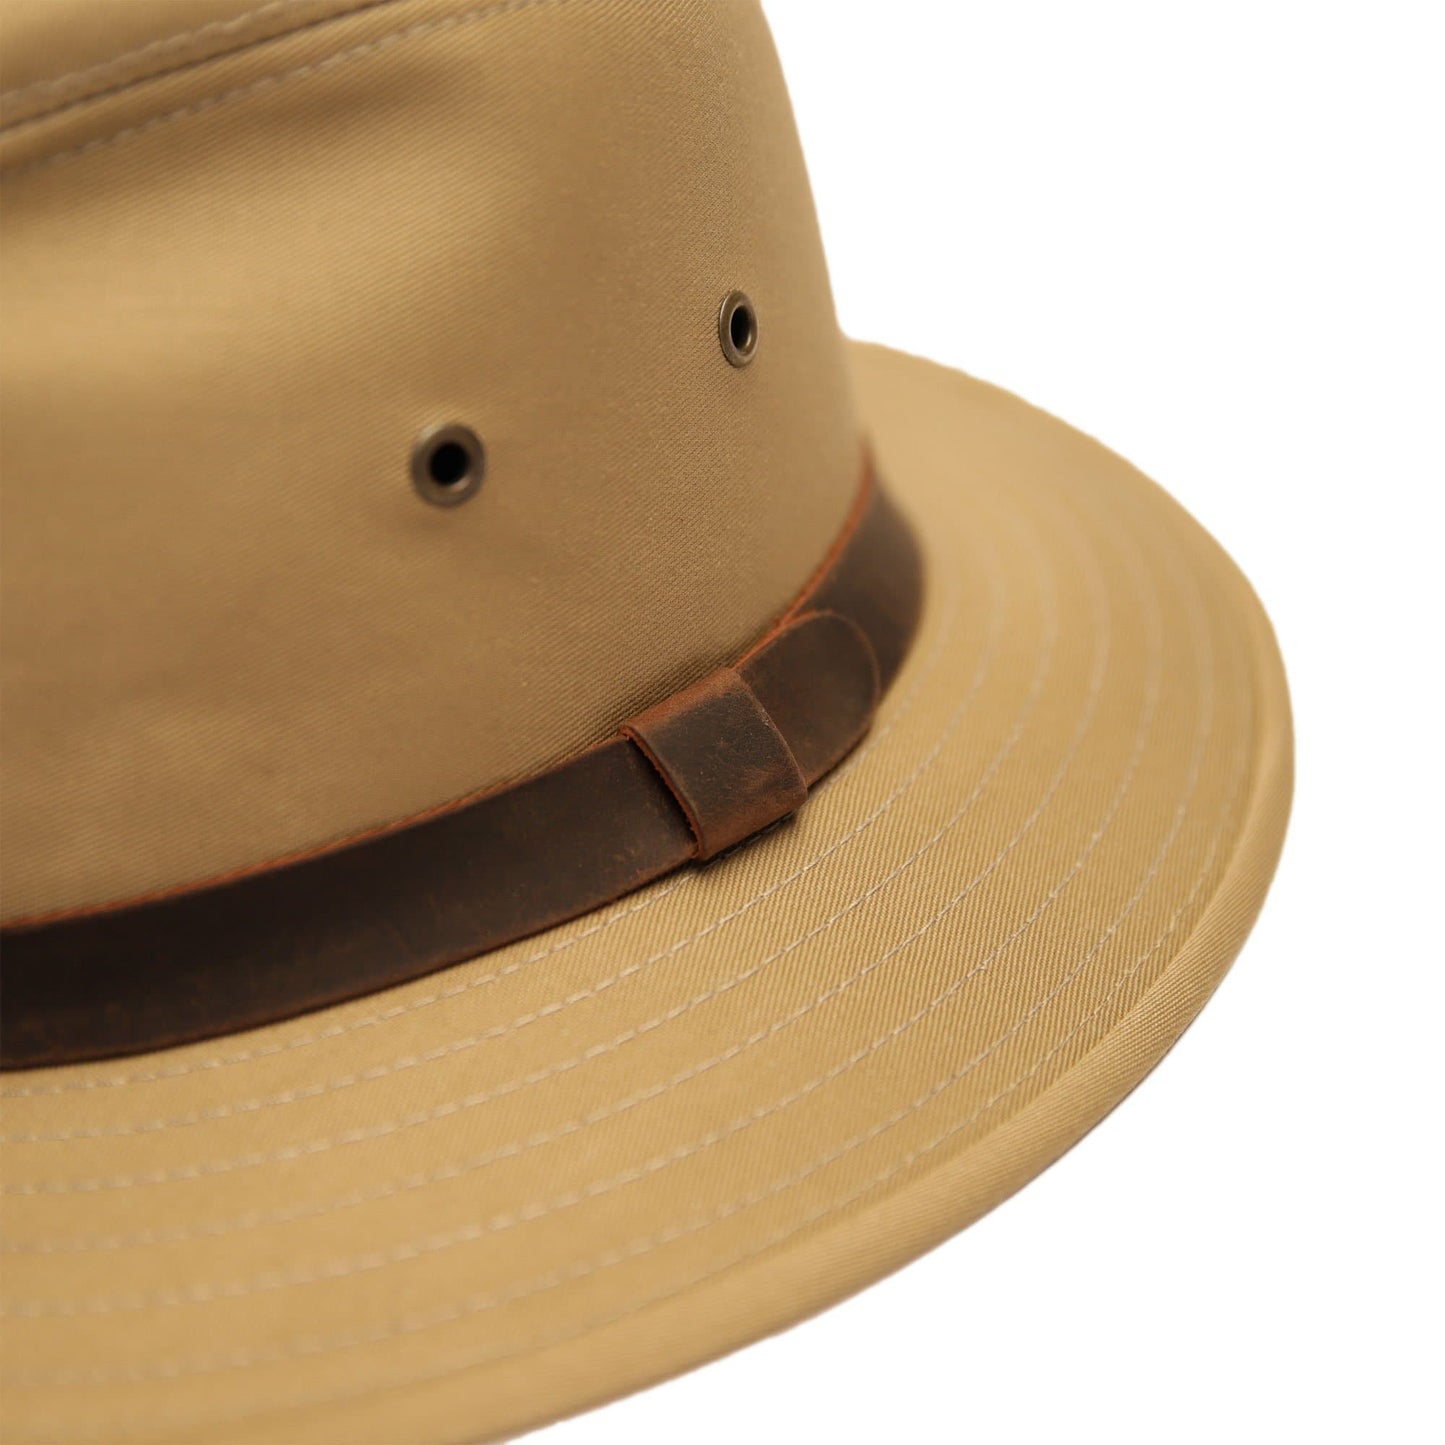 Classic Hat Series - Wayward Tribly Golden Sand